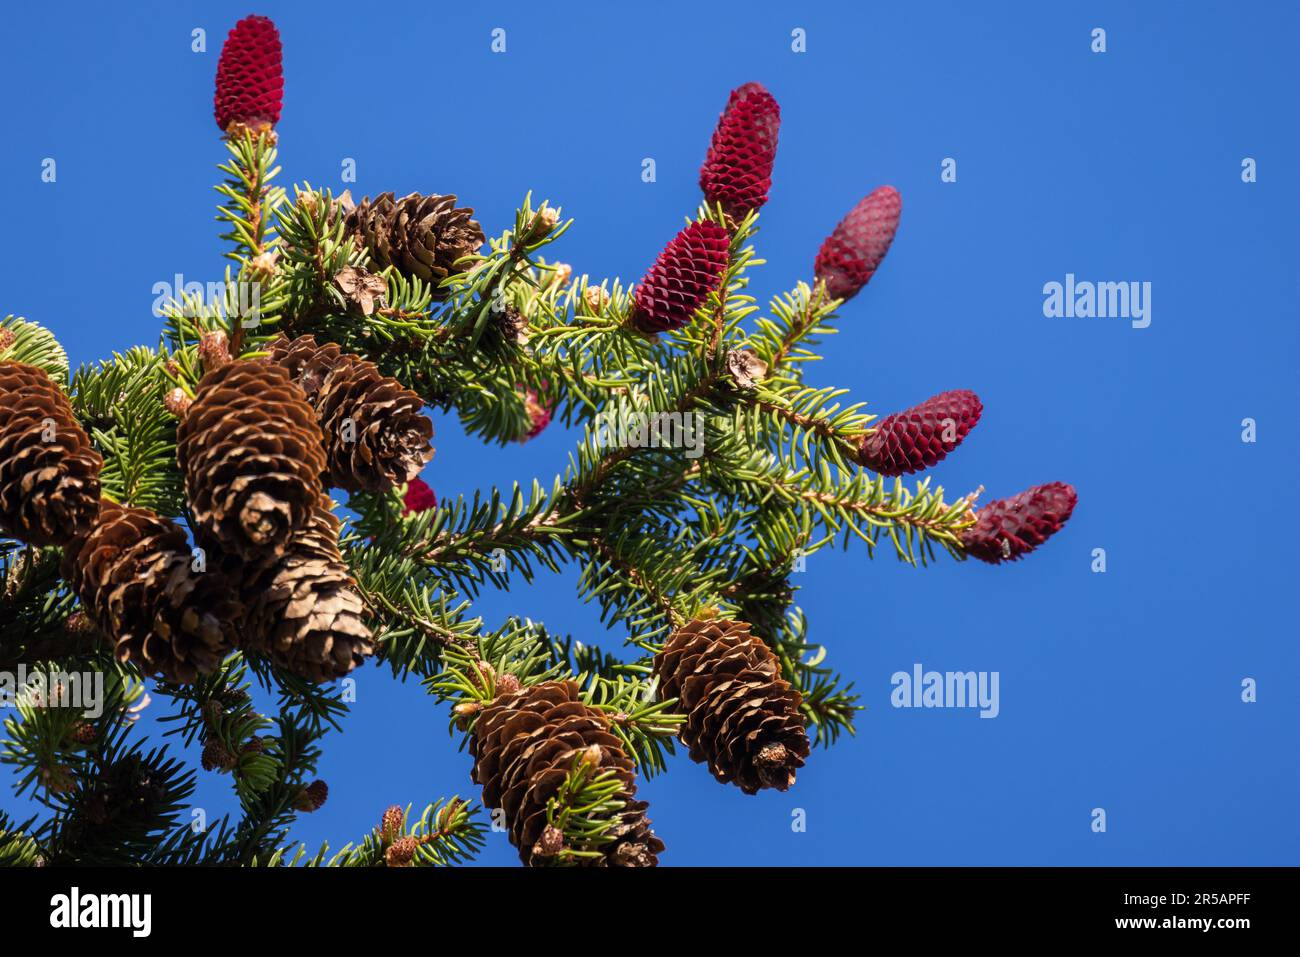 Fir tree branch with red immature cones is under clear blue sky on a spring day Stock Photo